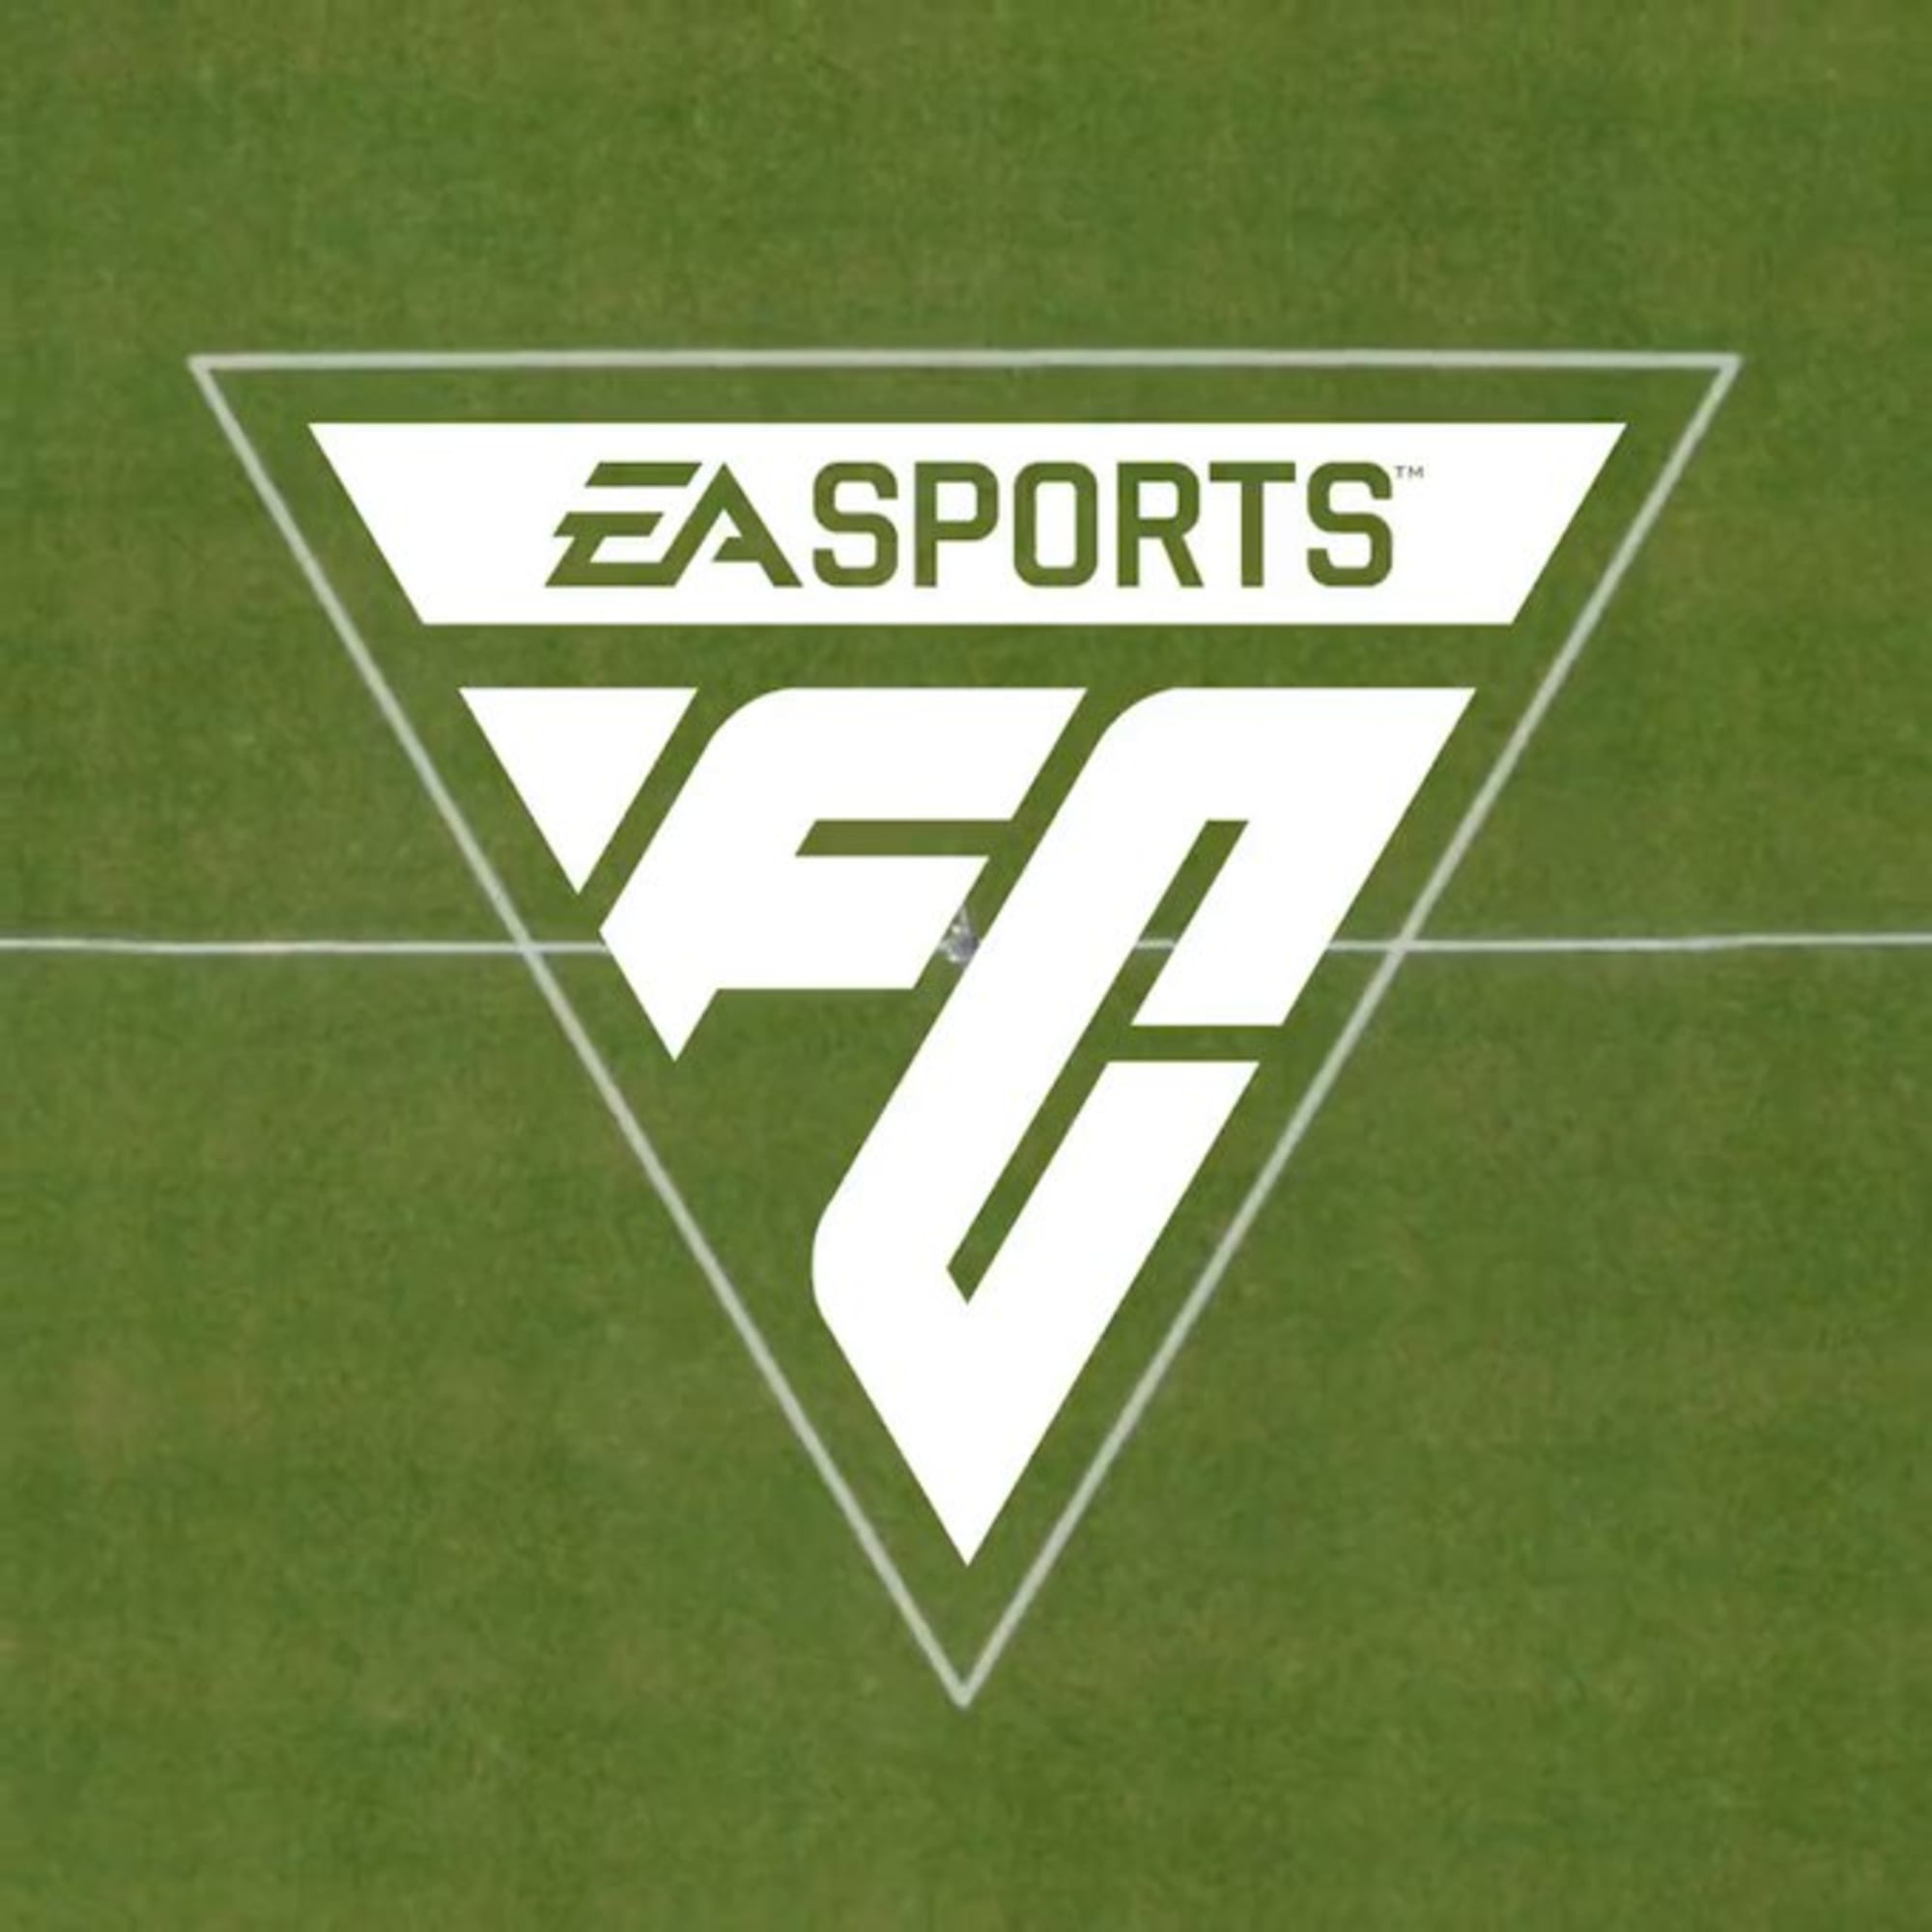 EA Sports FC 24 Icons and Heroes: Who's confirmed, who's leaked